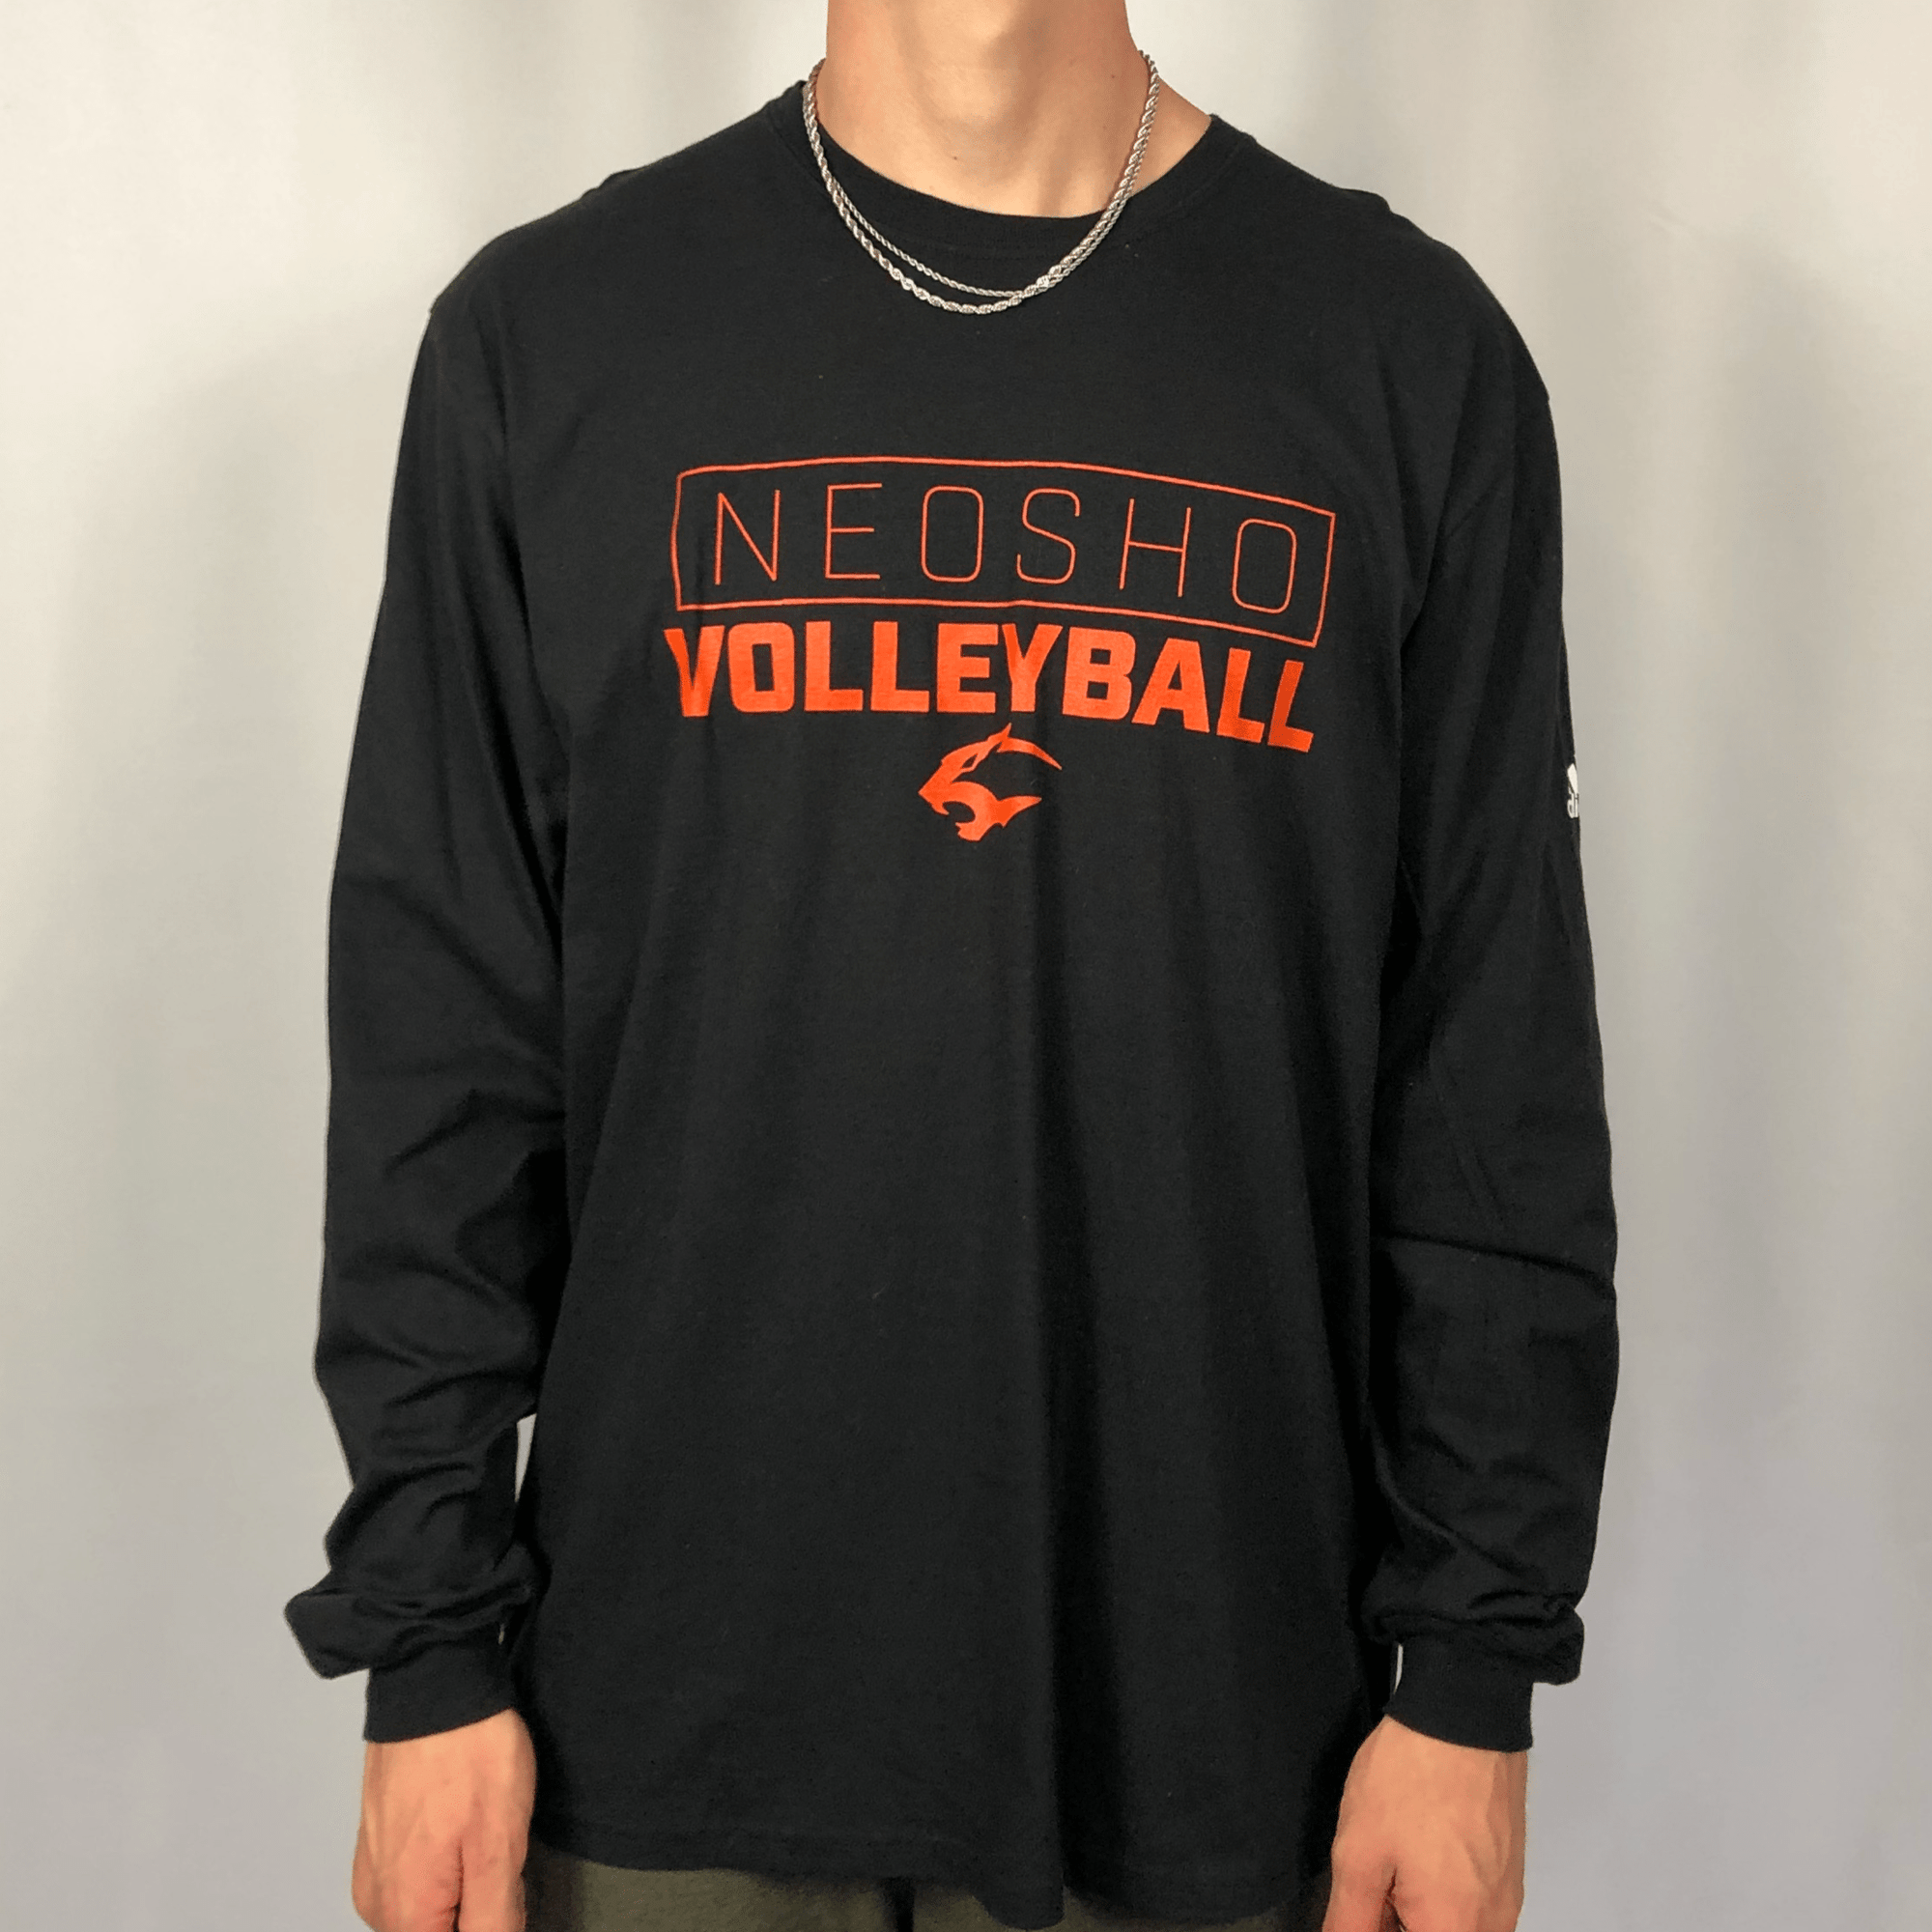 Adidas 'Neosho Volleyball' Long Sleeve Tee - XL - Vintique Clothing